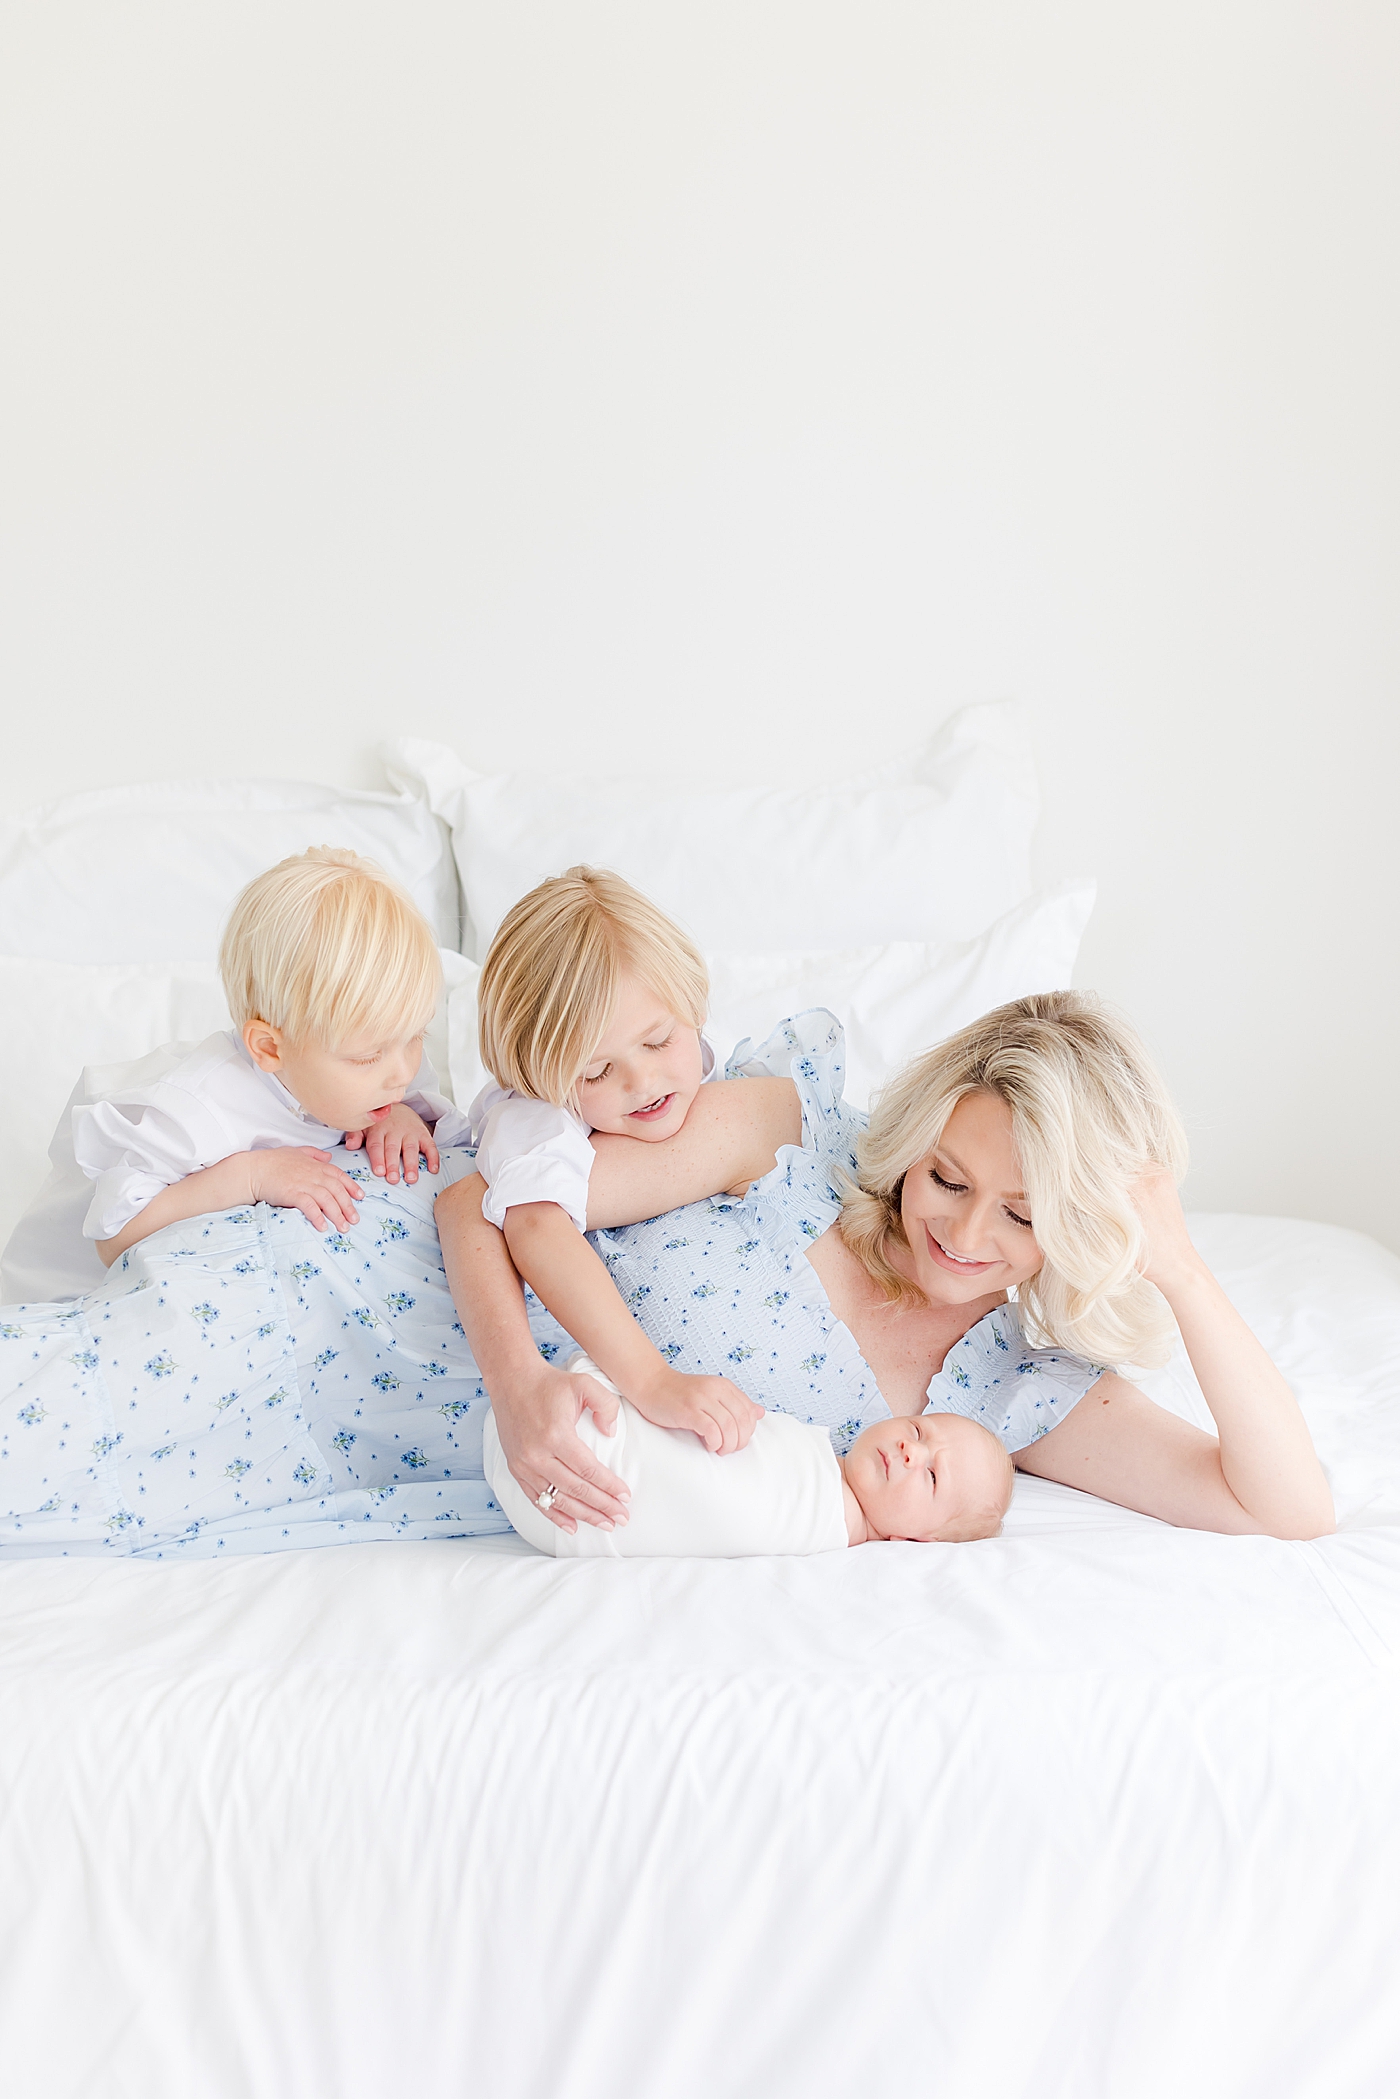 Mom with her three boys on a white bed in the studio | Image by Emily Gerald Photography